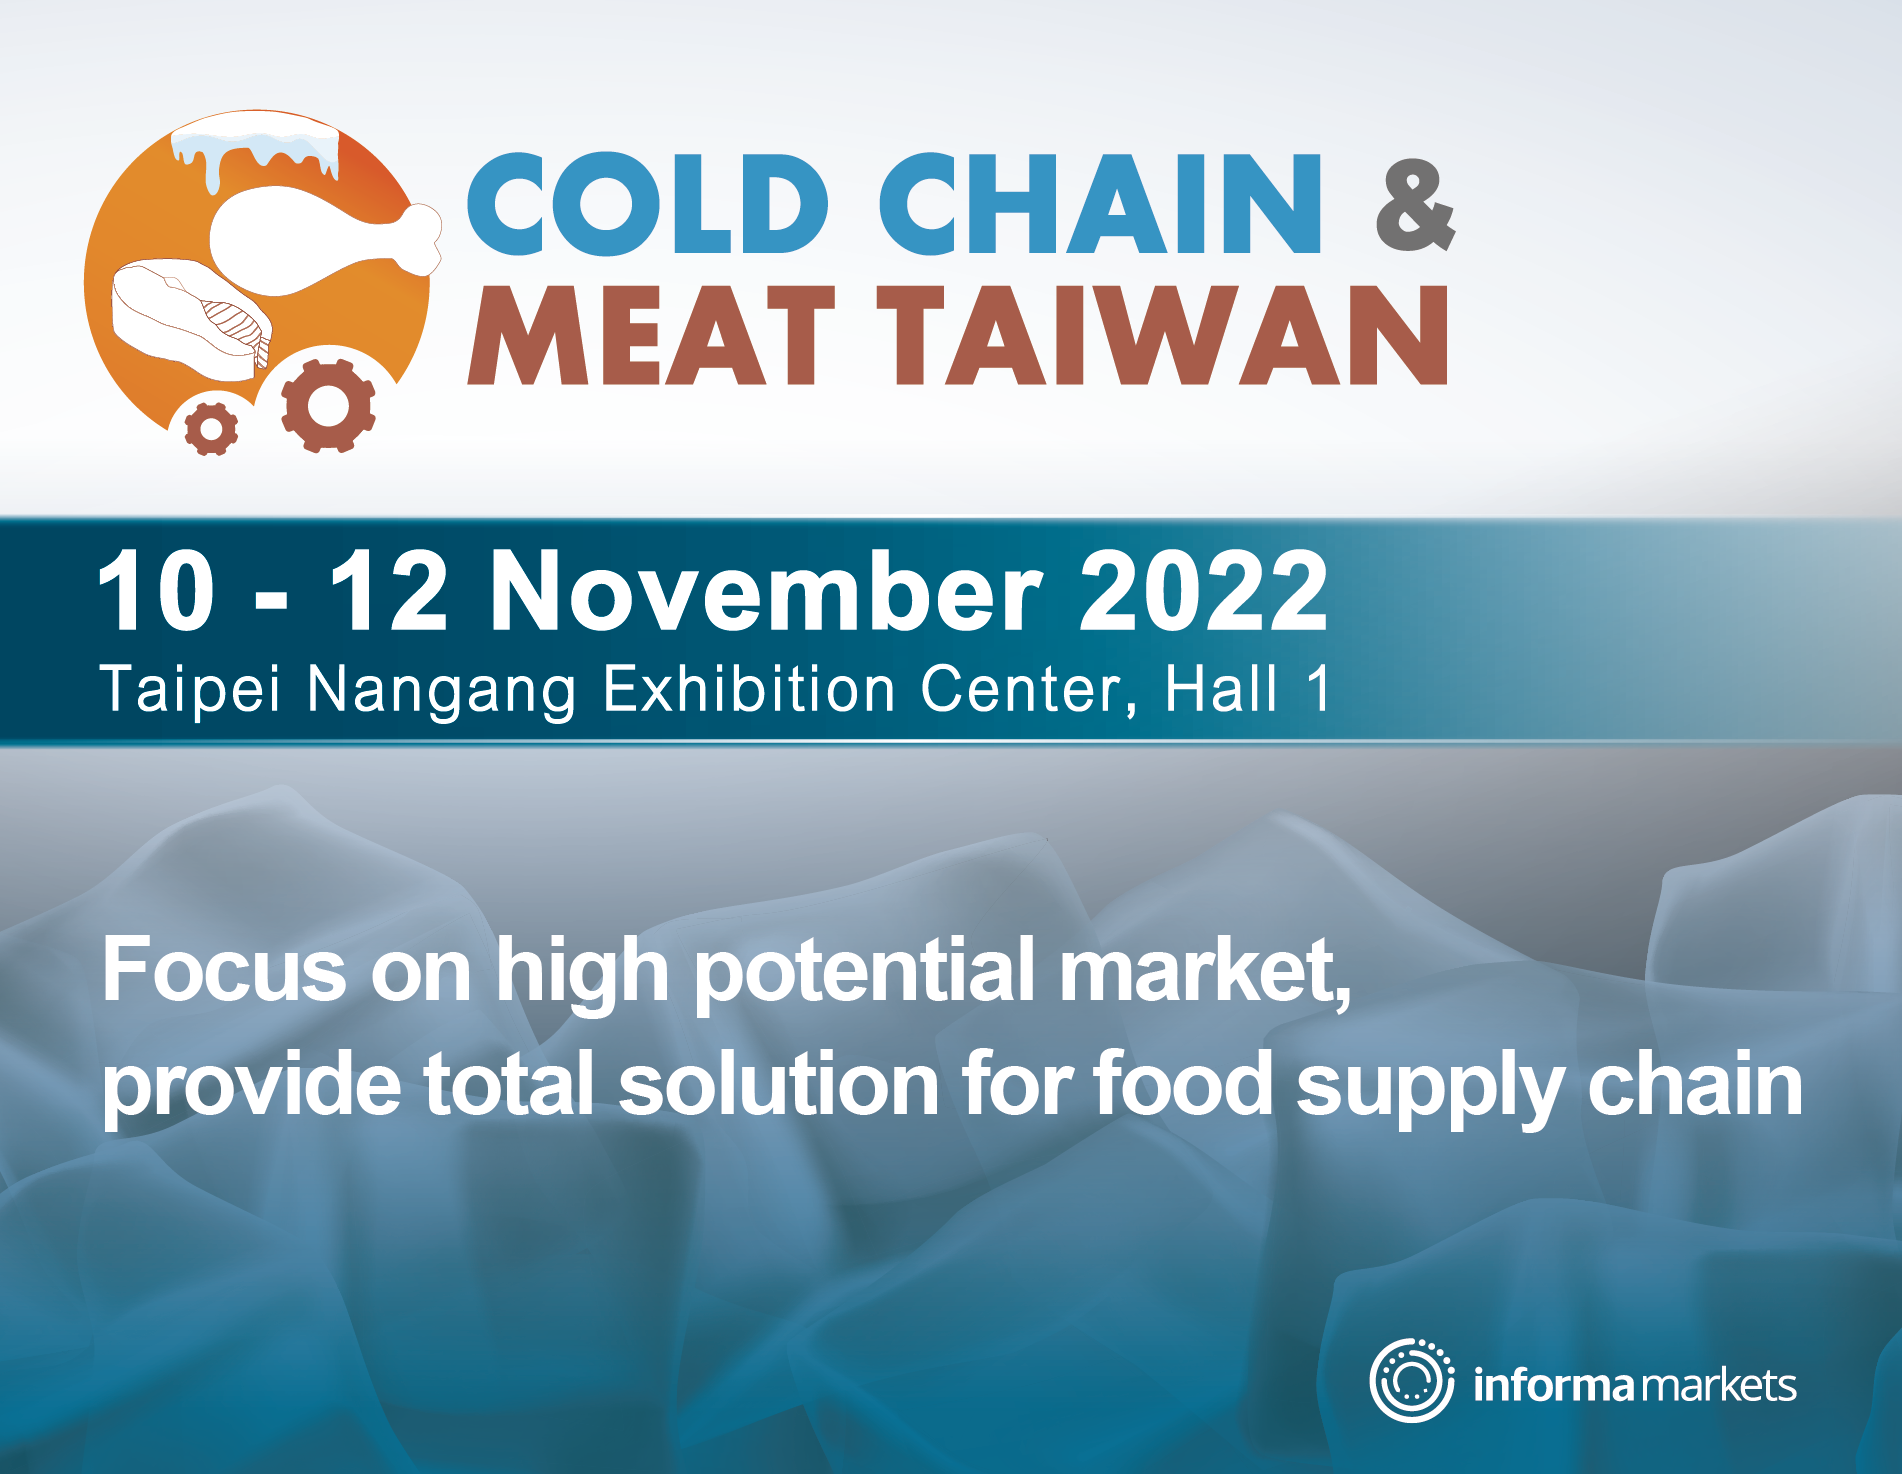 The dedicated Cold Chain & Meat Process show for agriculture, livestock, and aquaculture products in Taiwan